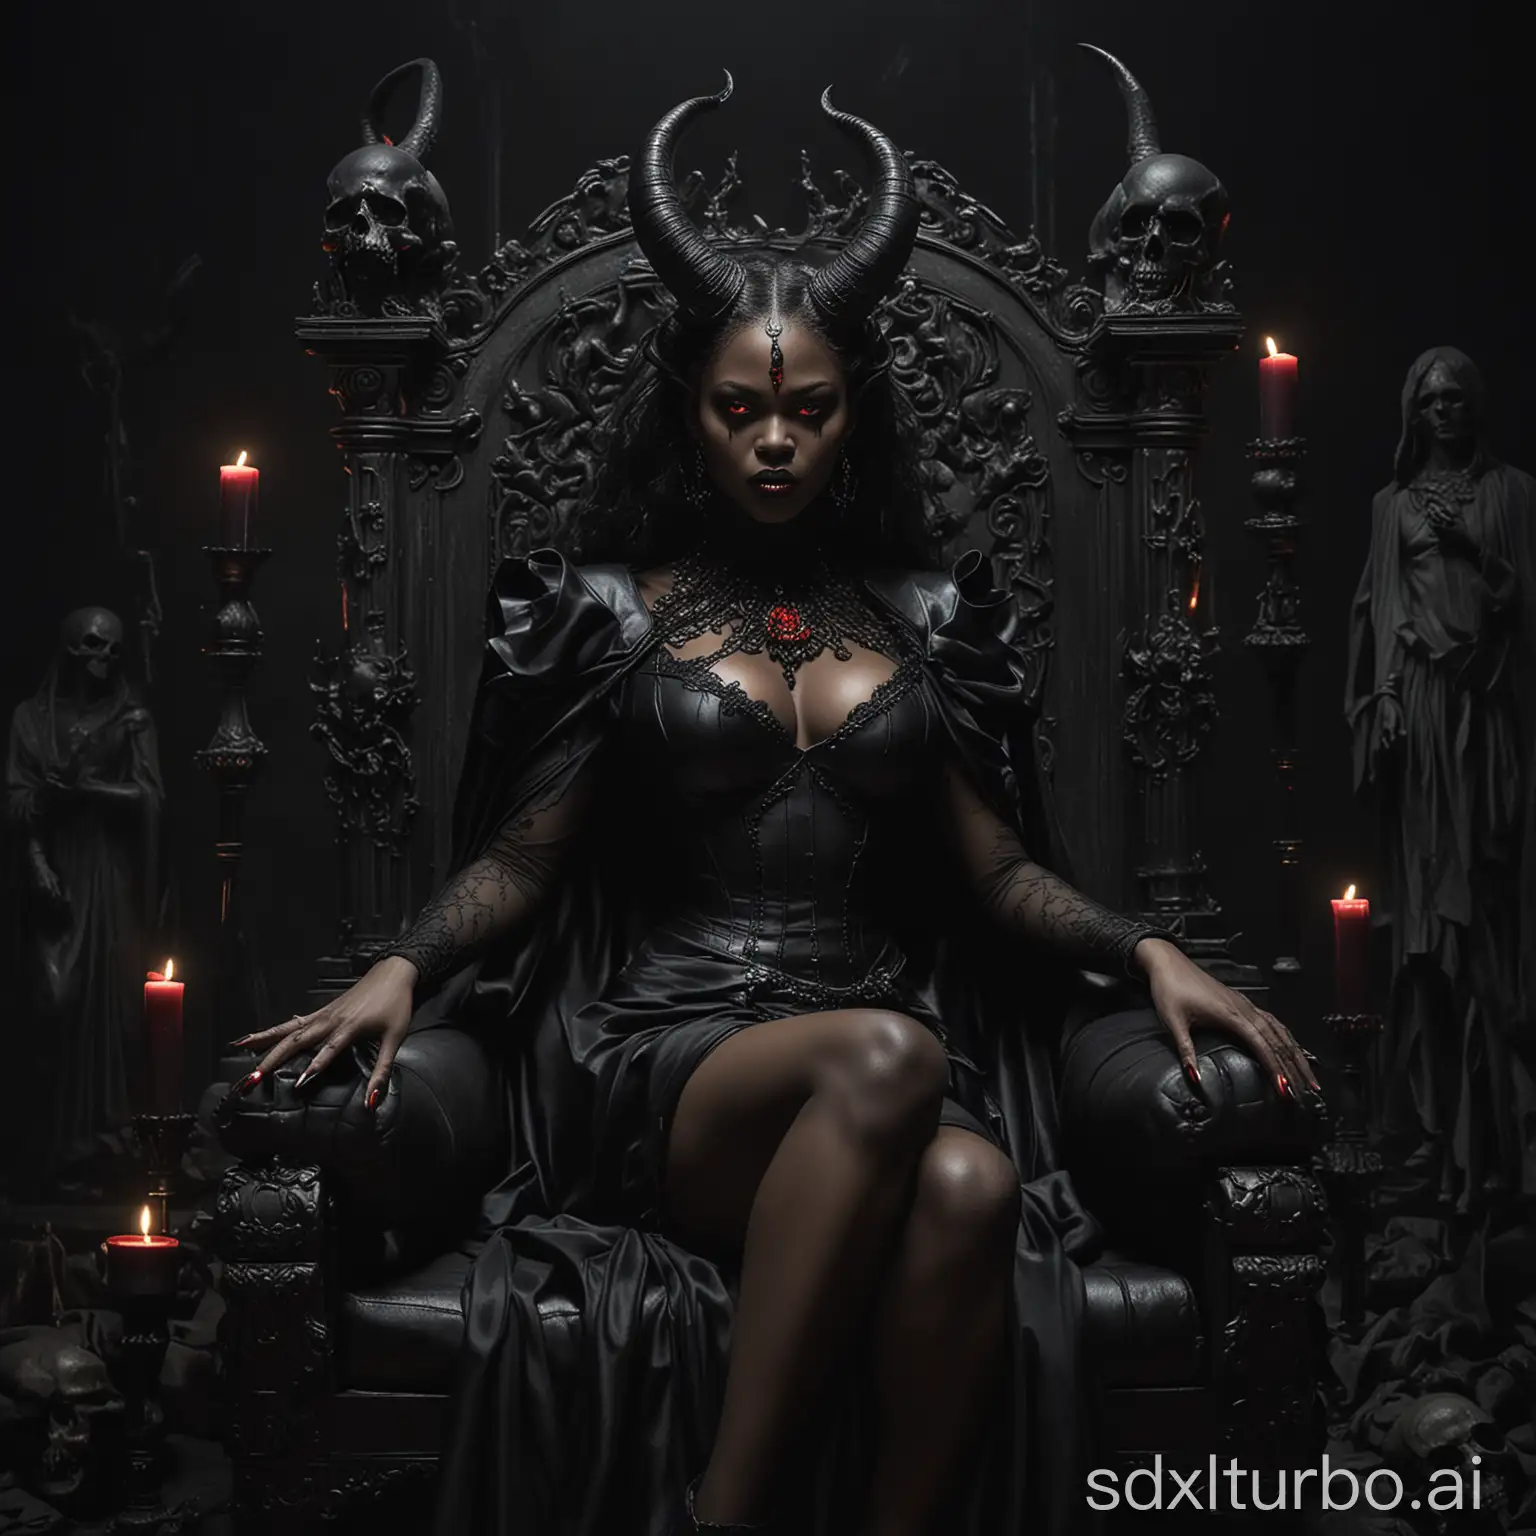 a majestic and powerful black woman demon with red eyes, black makeup, big breasts, exuding an aura of authority. Her imposing presence is accentuated by her mesmerizing horns, sitting majestically on a black throne with intricately detailed seat adding to the air of mystique. Her dark costume and black cape with a high collar further accentuate her imposing presence, she wears high heels. The enchanting atmosphere is deepened by two skulls on either side, each with a lit black candle that casts mysterious shadows.